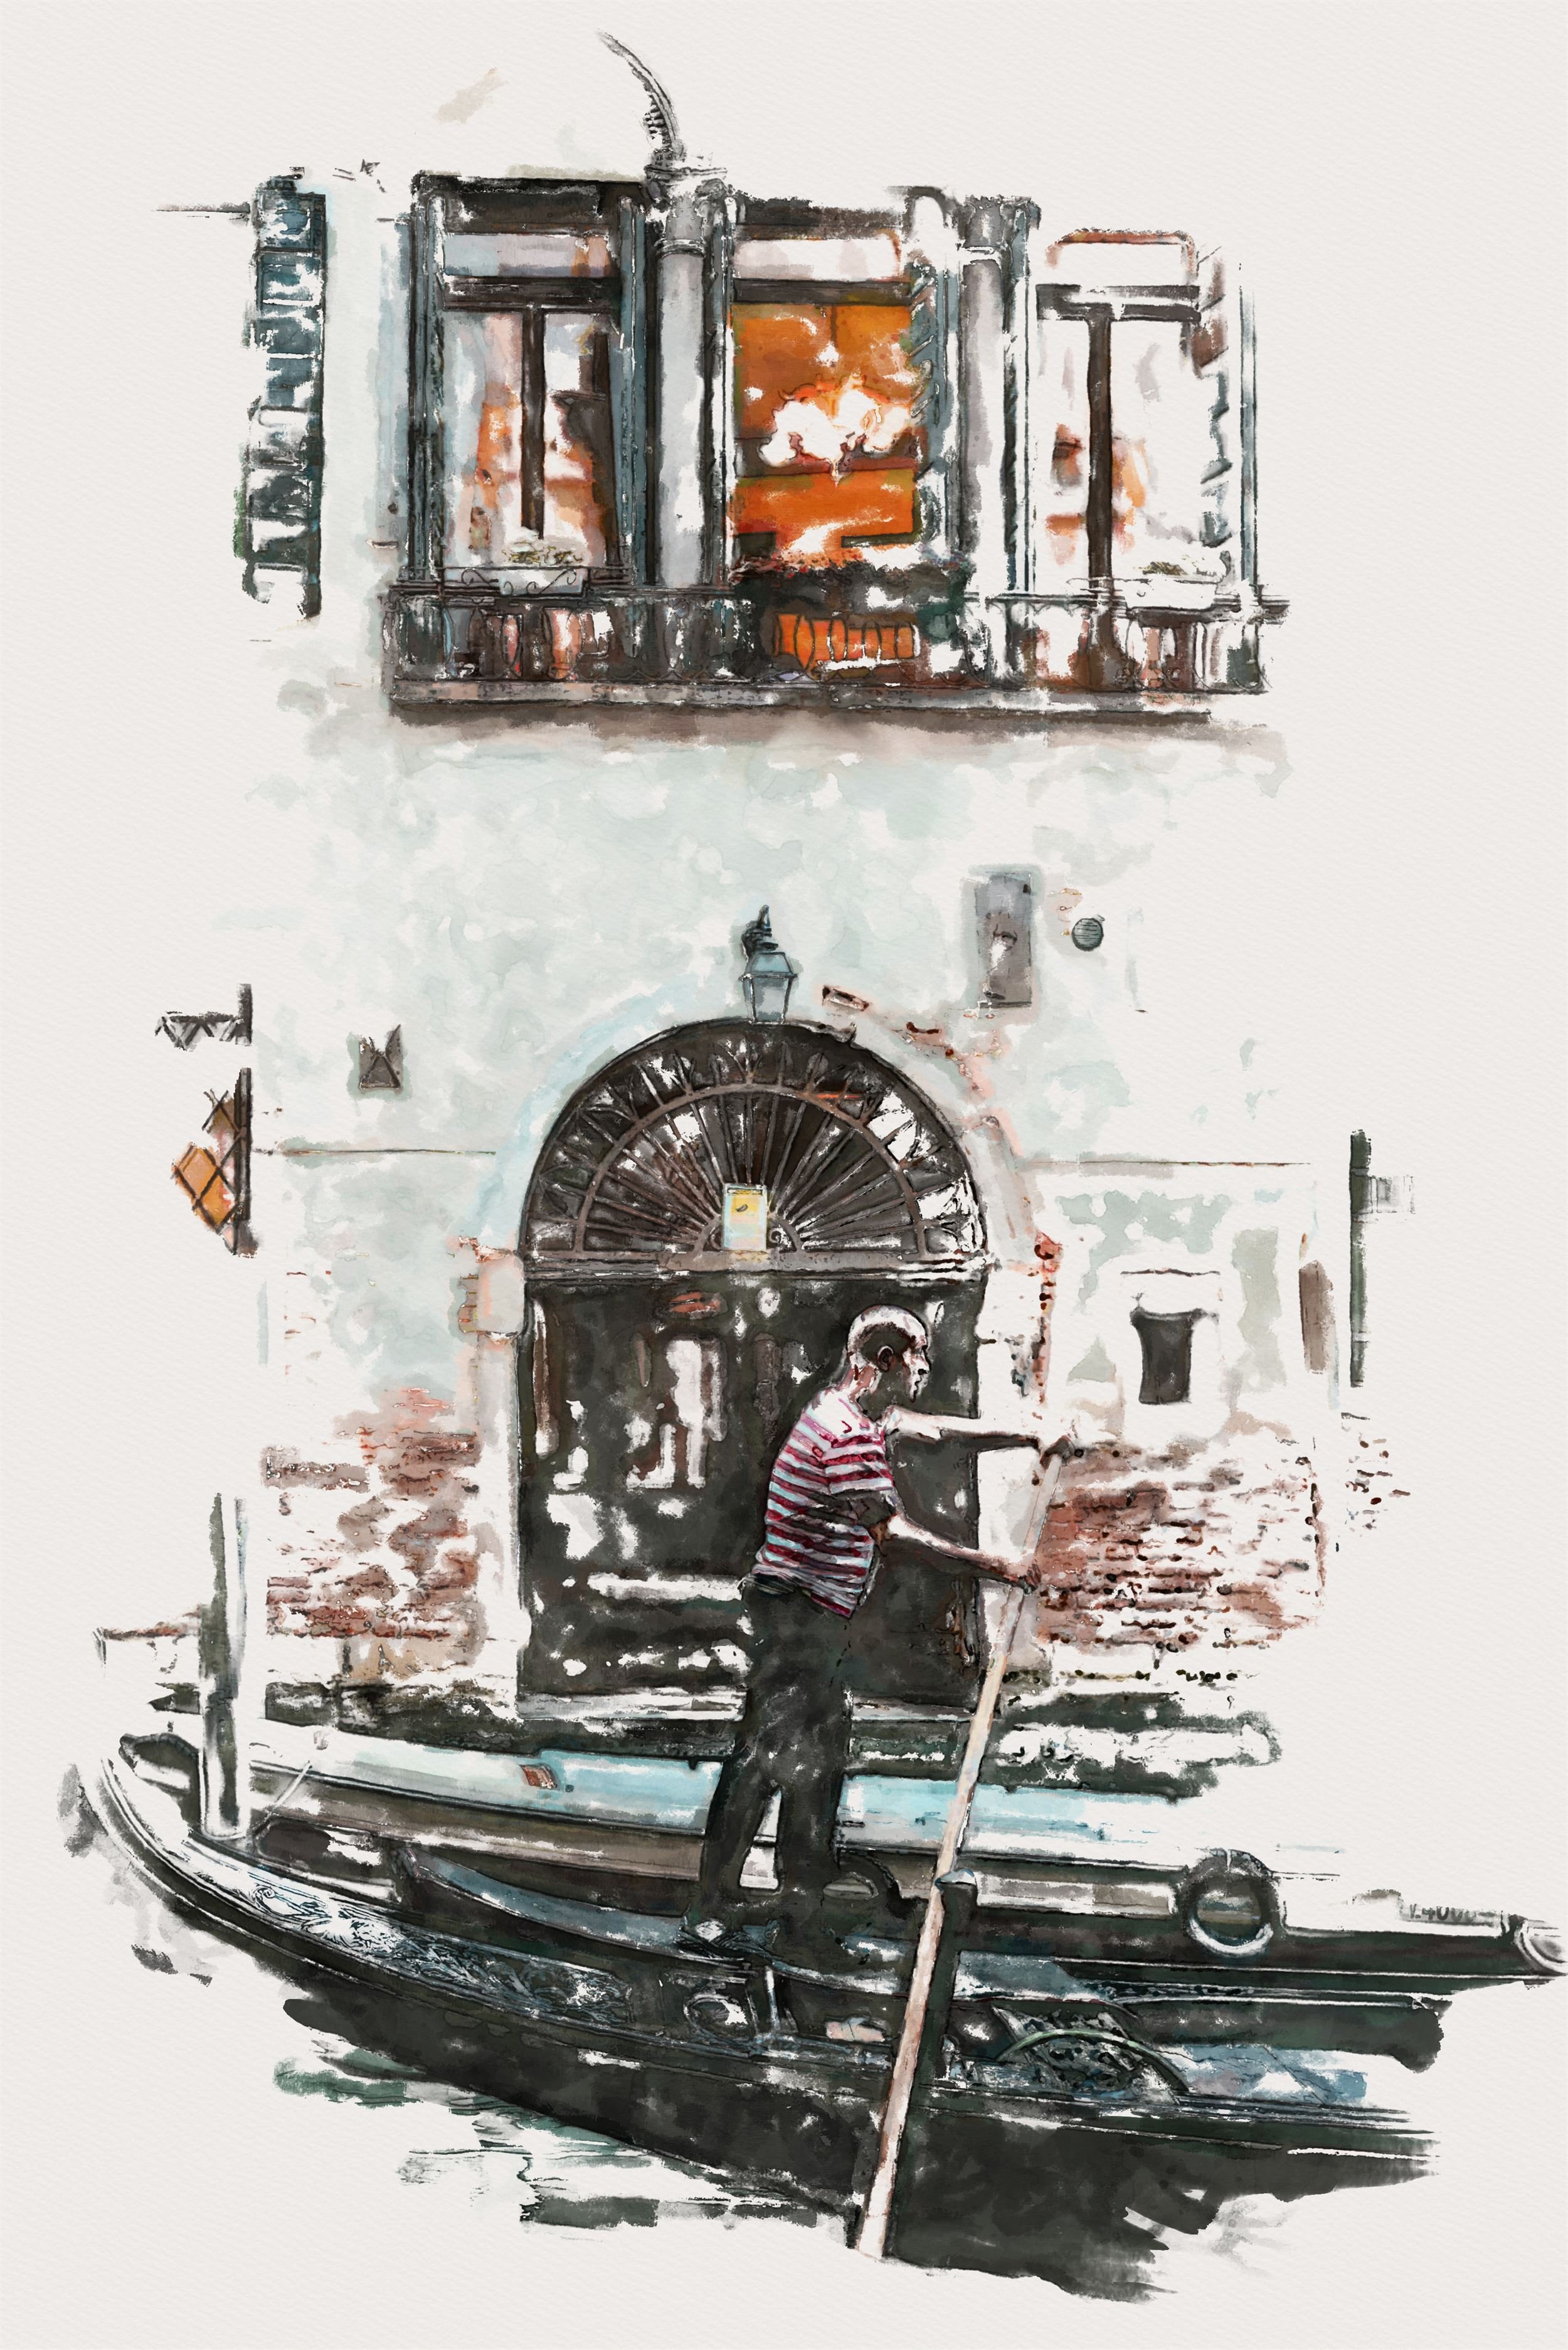 Watercolor Sketch Photo Effect - street image example.